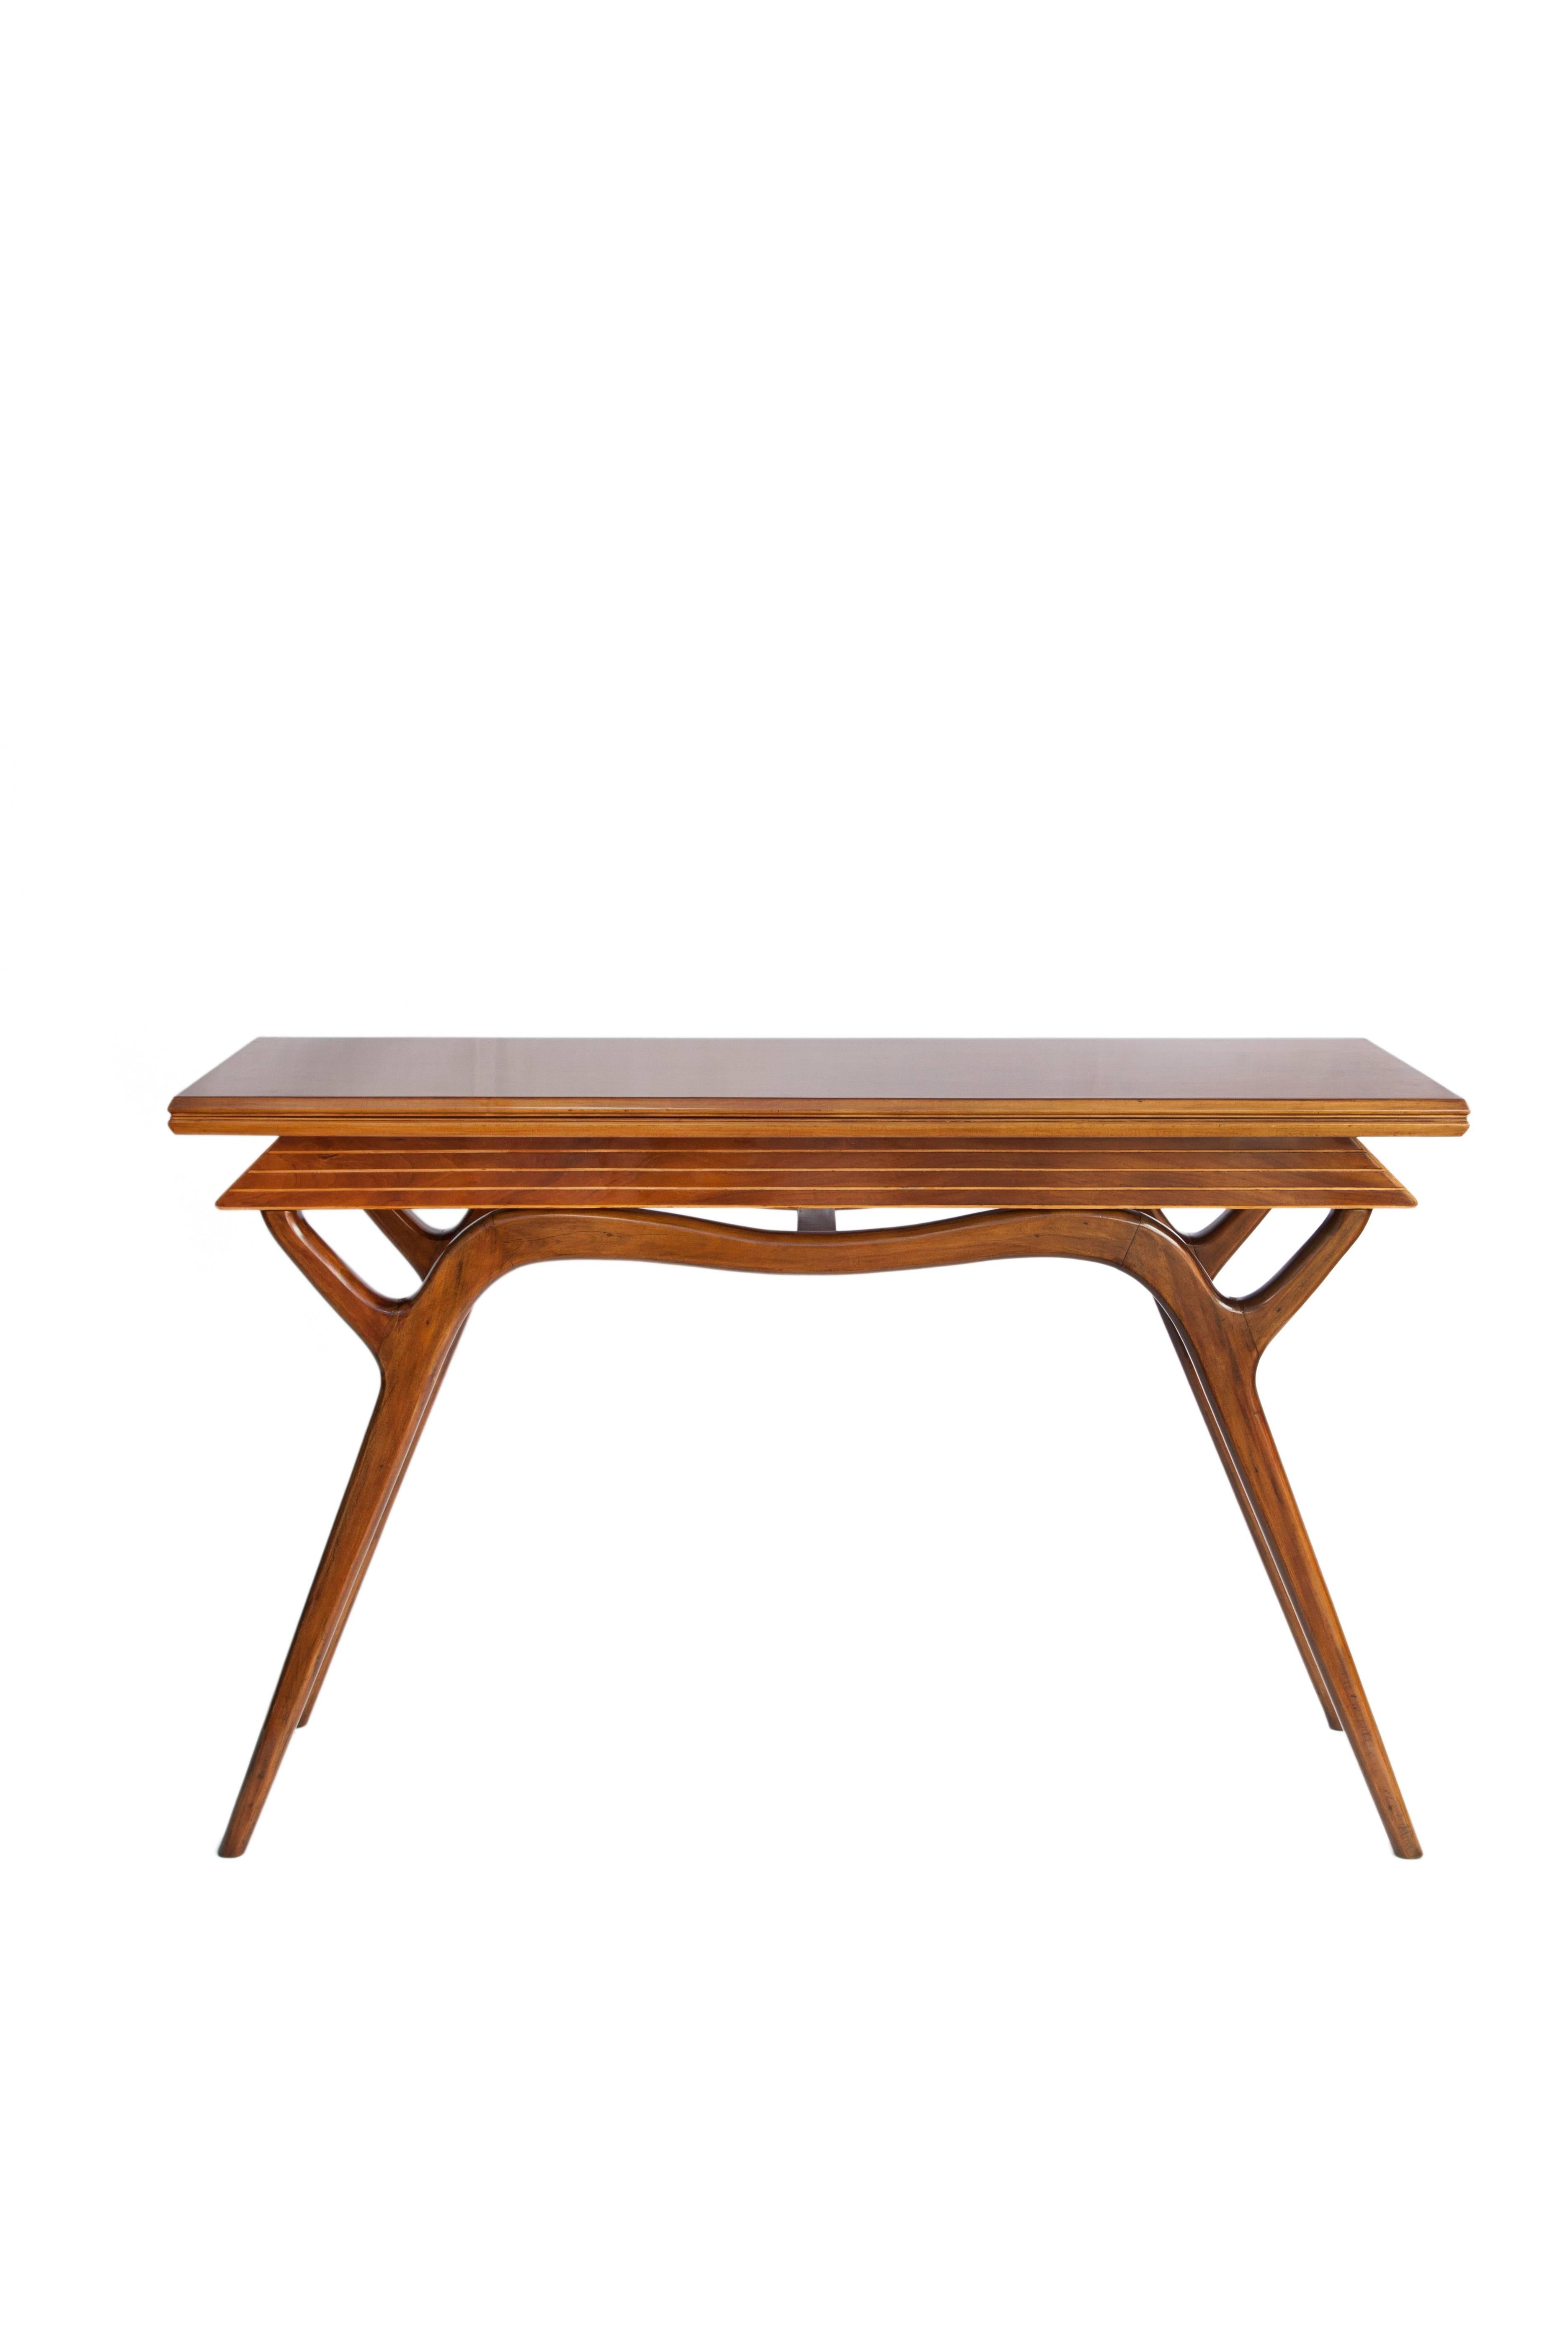 Giuseppe Scapinelli expandable console. Produced during the 1950s in Brazil in Caviuna wood. The table top unfolds to form a dining table. The piece is in good vintage condition with wear consistent to age and use.